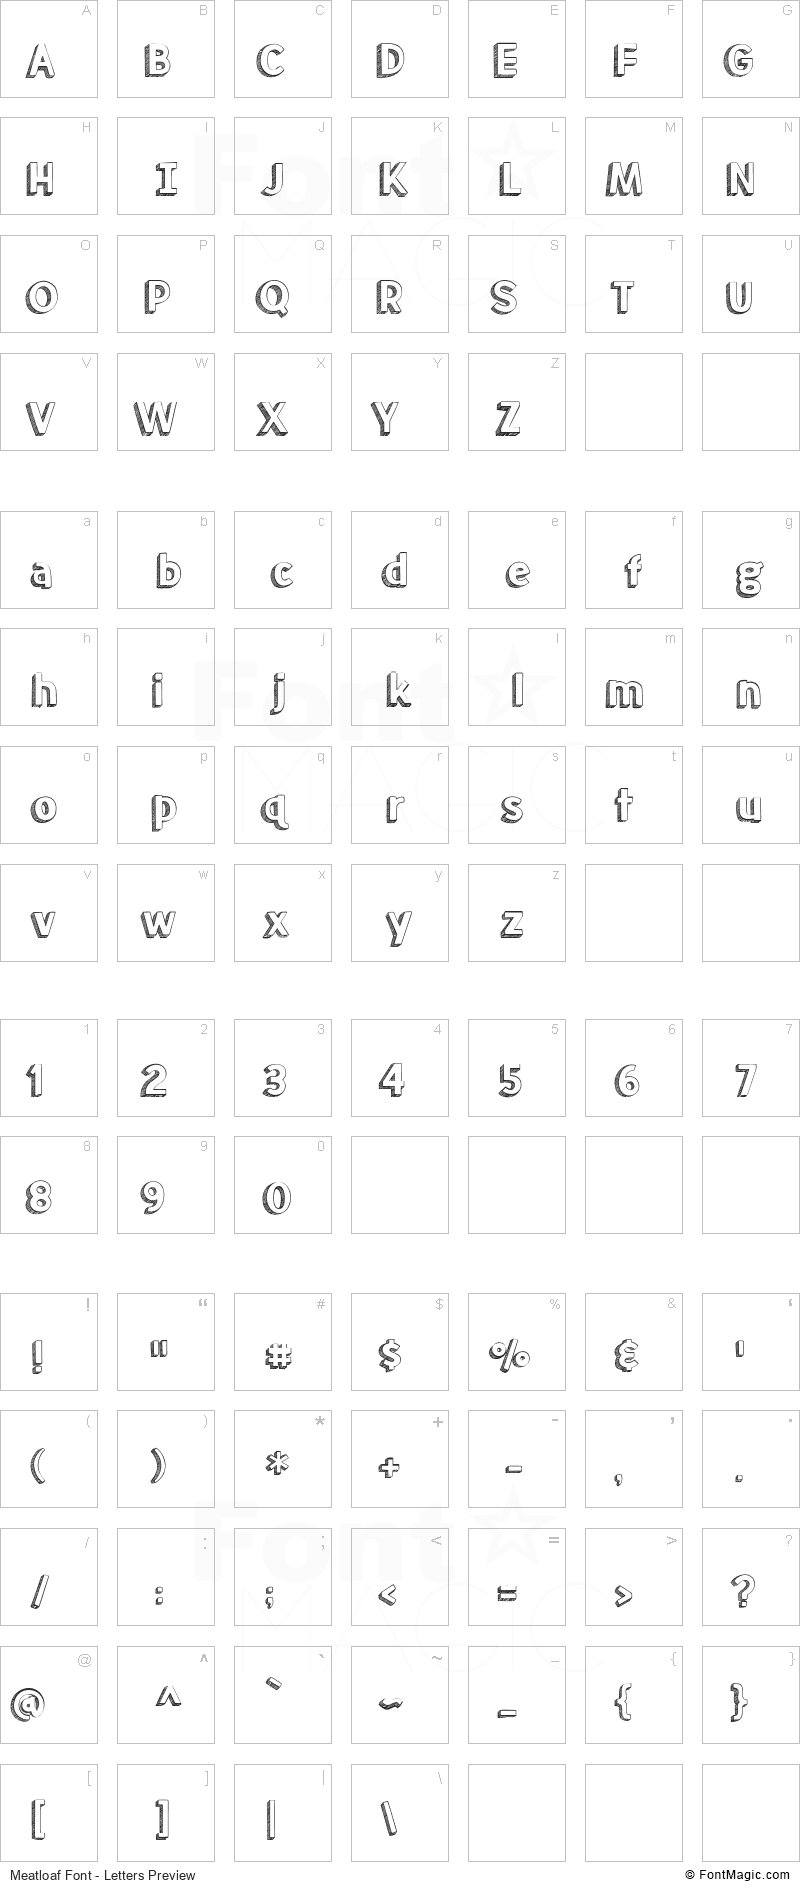 Meatloaf Font - All Latters Preview Chart